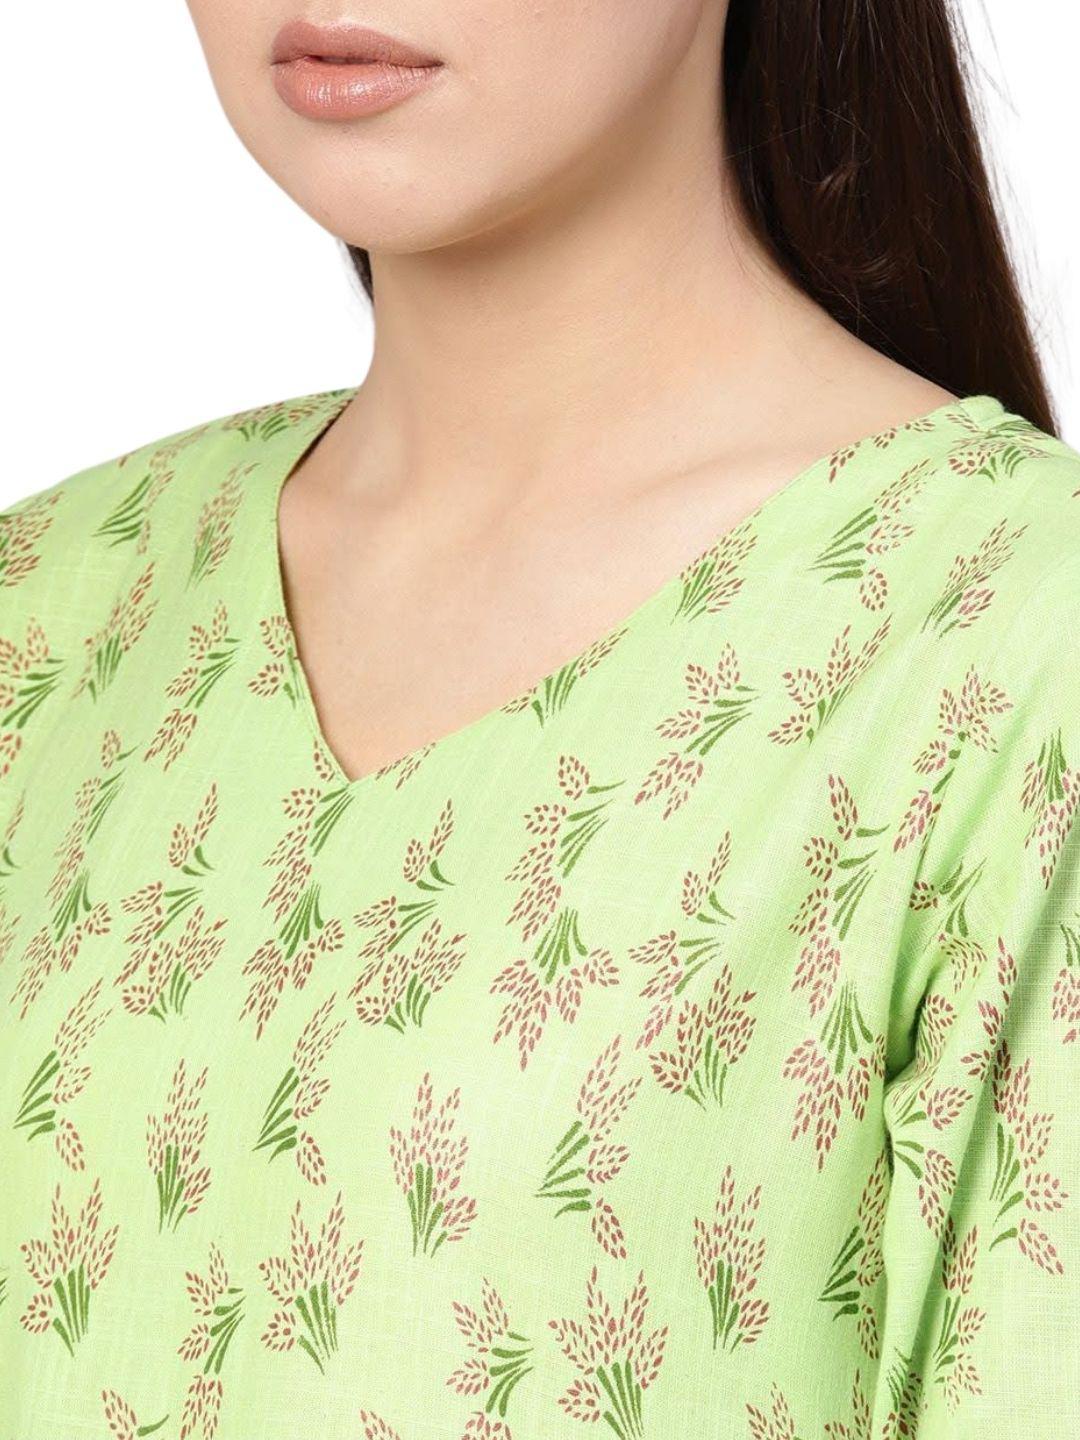 green-floral-printed-midi-gathered-dress-10204014GR, Women Indian Ethnic Clothing, Cotton Dress